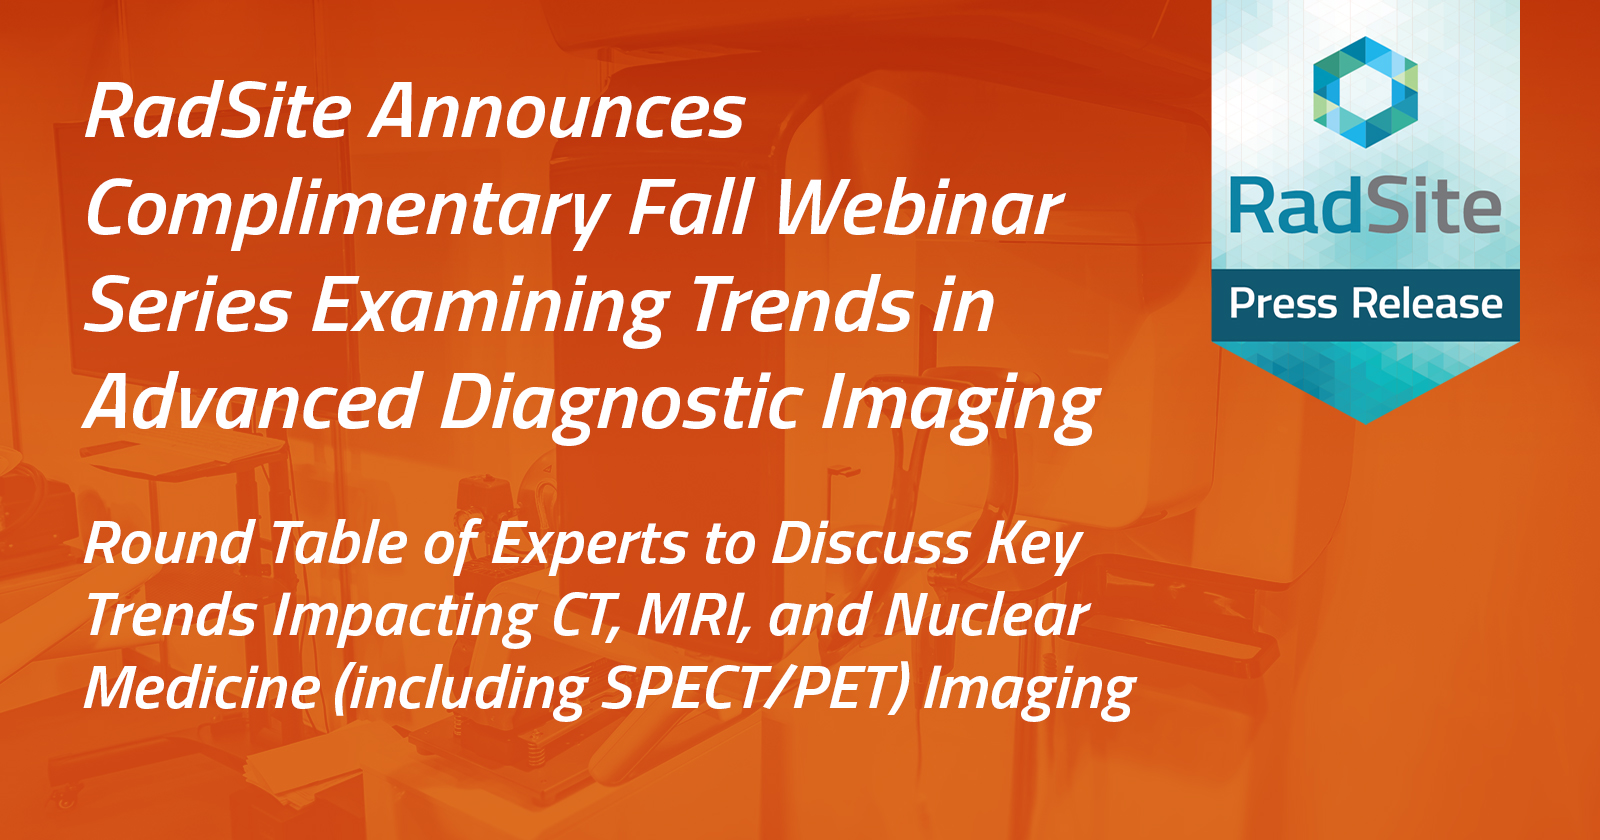 Trends in Advanced Diagnostic Imaging